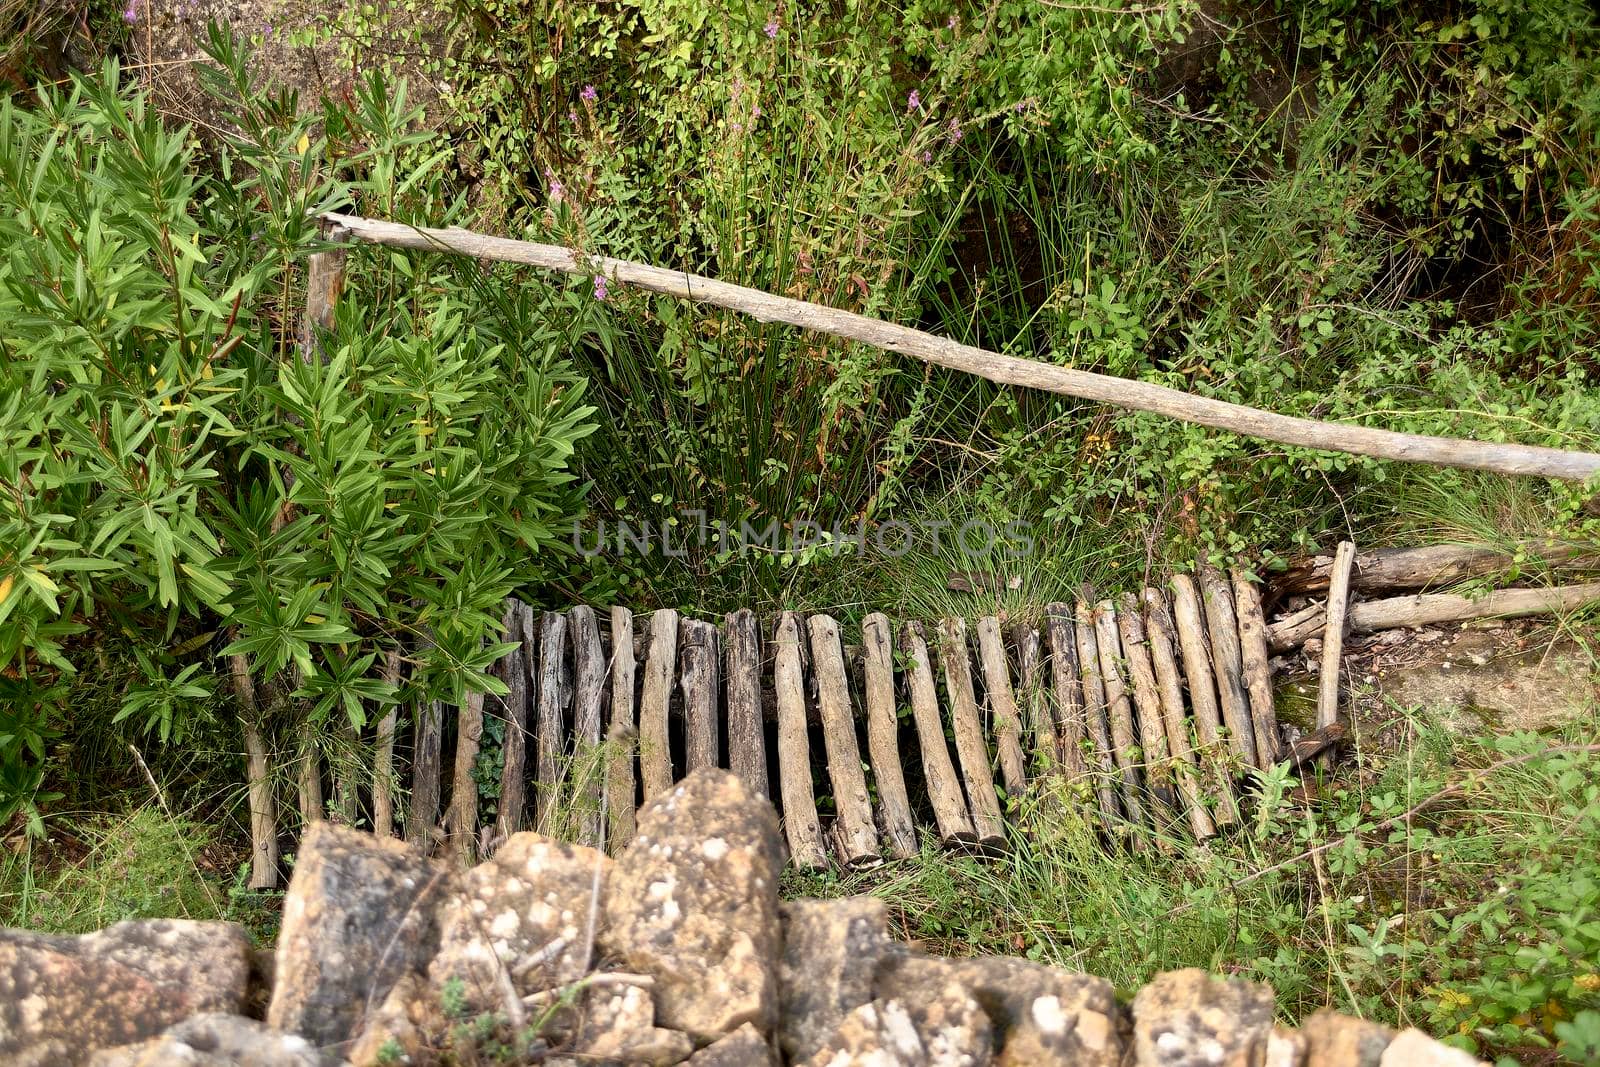 Bridge made of wood destroyed in the vegetation. Destruction, zenithal view, rustic and handmade.